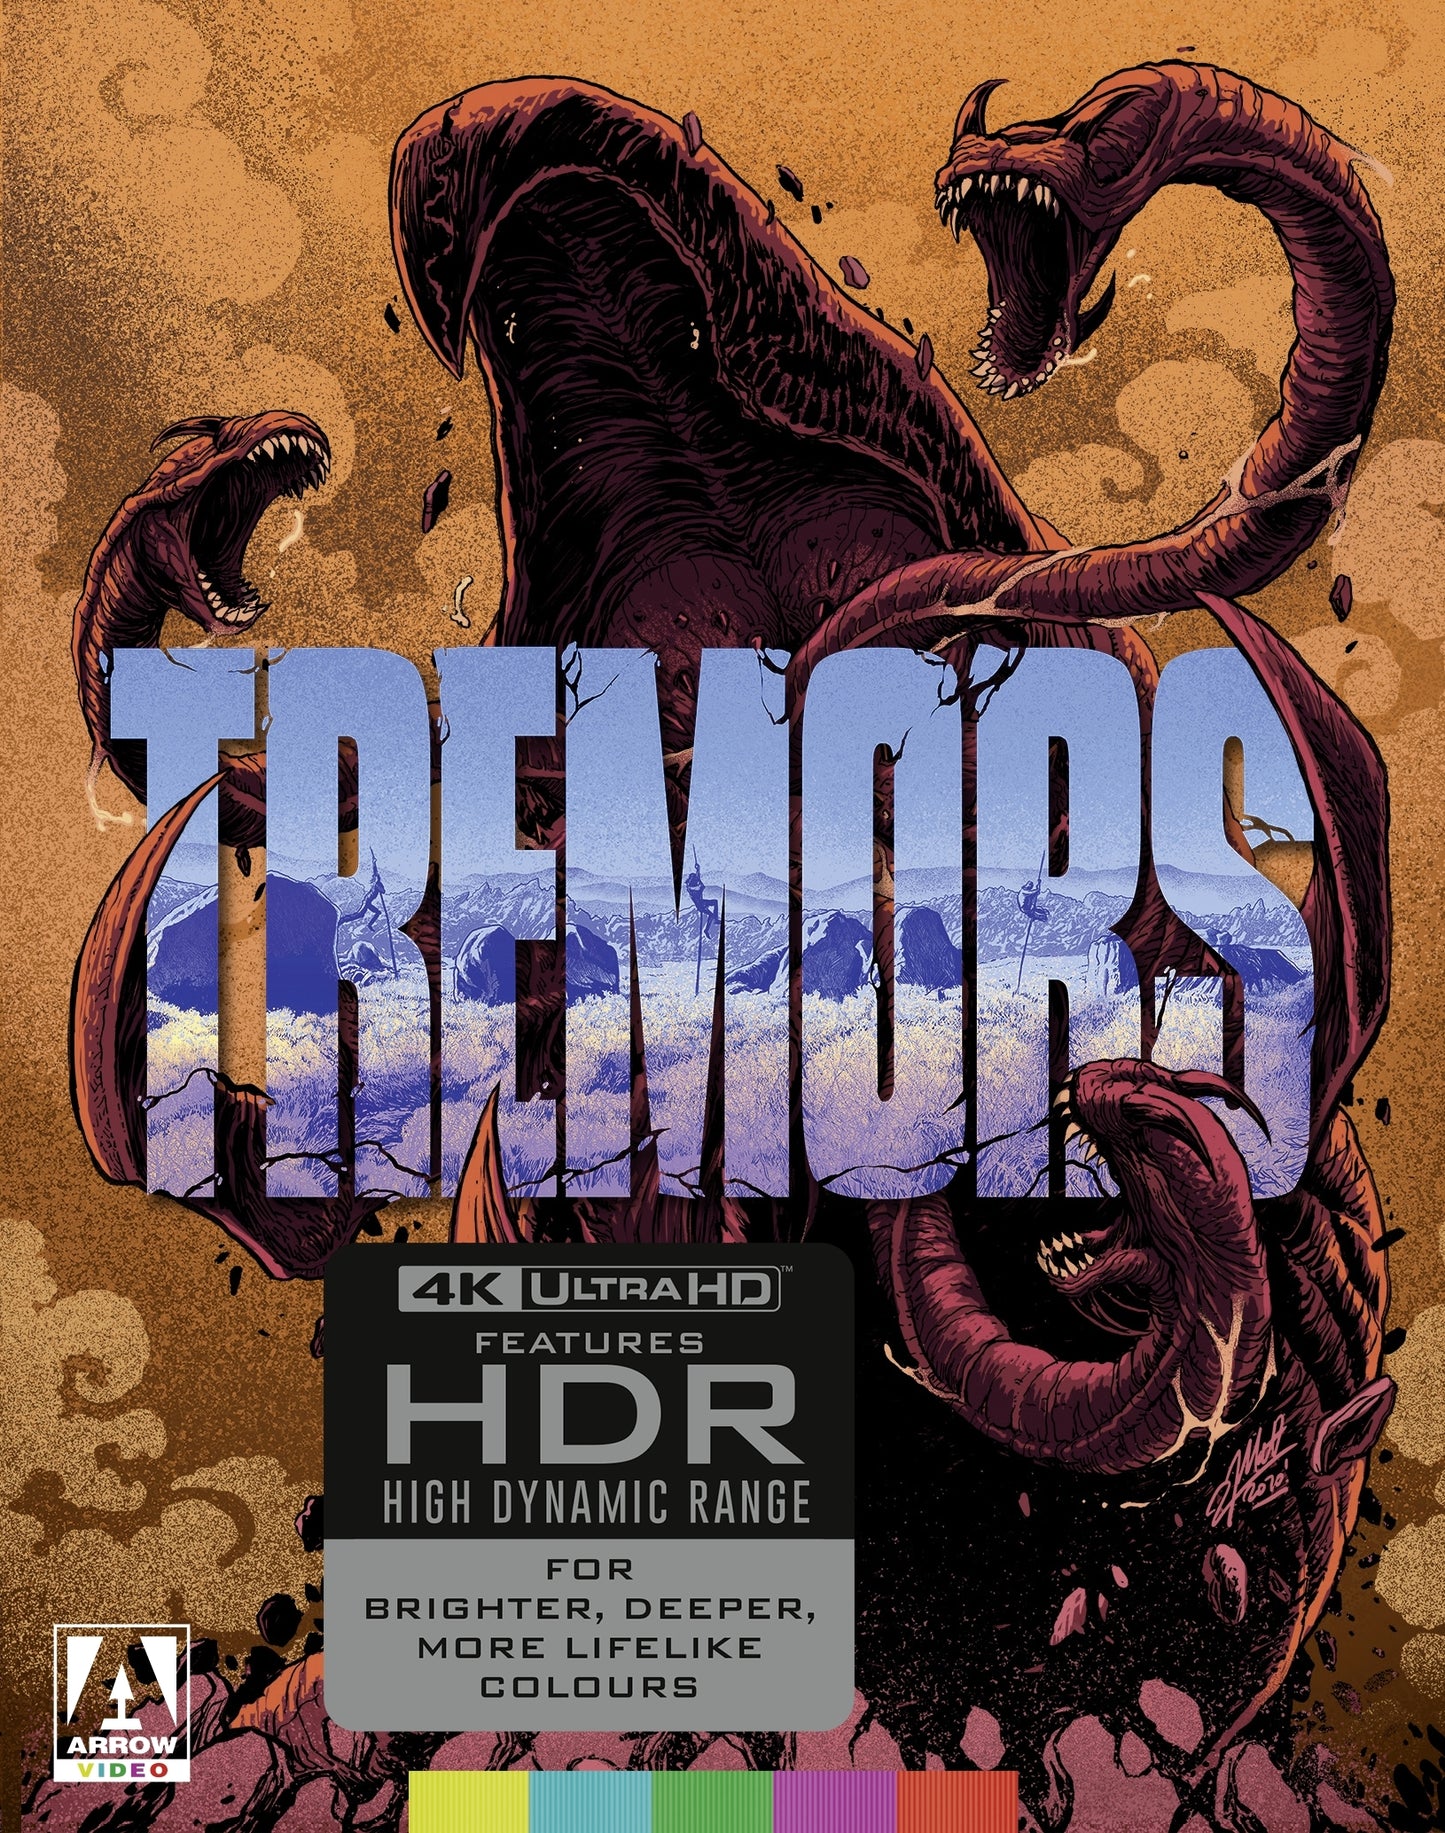 Tremors 4K: Limited Edition